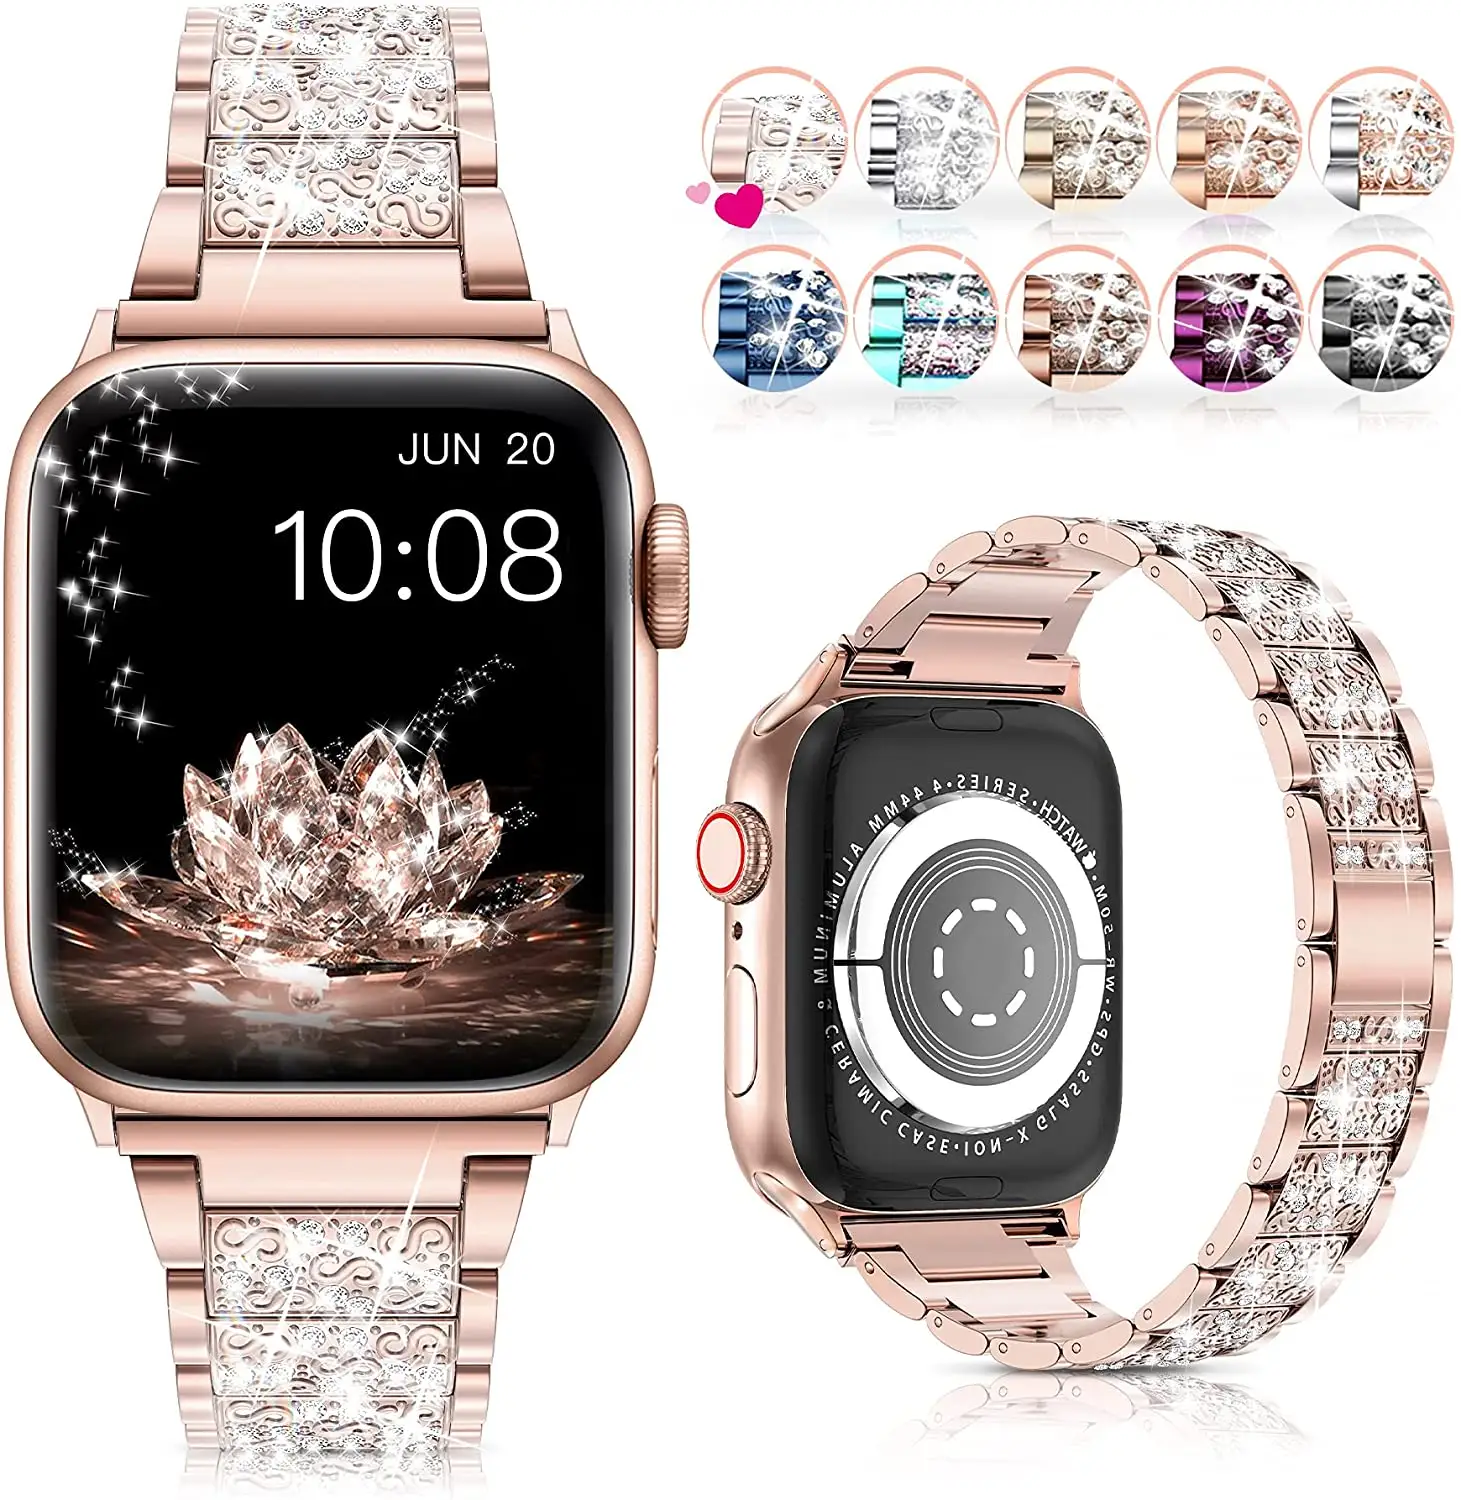 Band for Apple Watch , Bling Replacement Bracelet iWatch Band, Diamond Rhinestone Stainless Steel Metal Wristband Strap